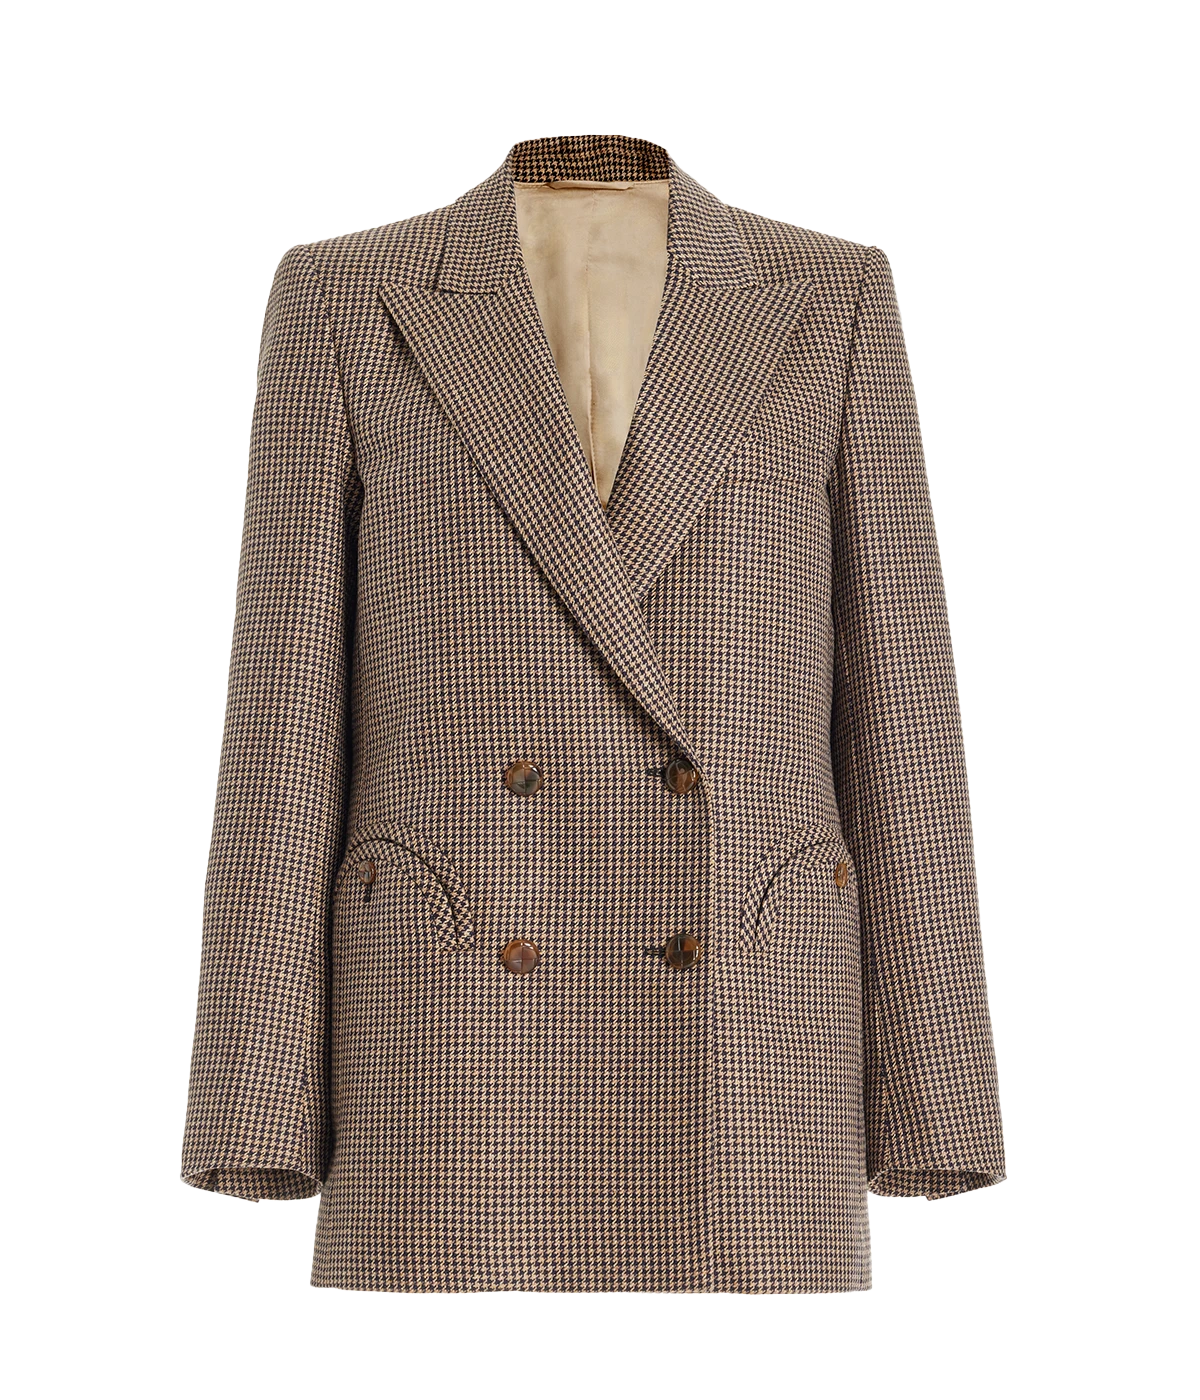 Double breasted brown houndstooth blazer by Blazé Milano. Feature Peak Lapels, single rear vent and smiley pockets.